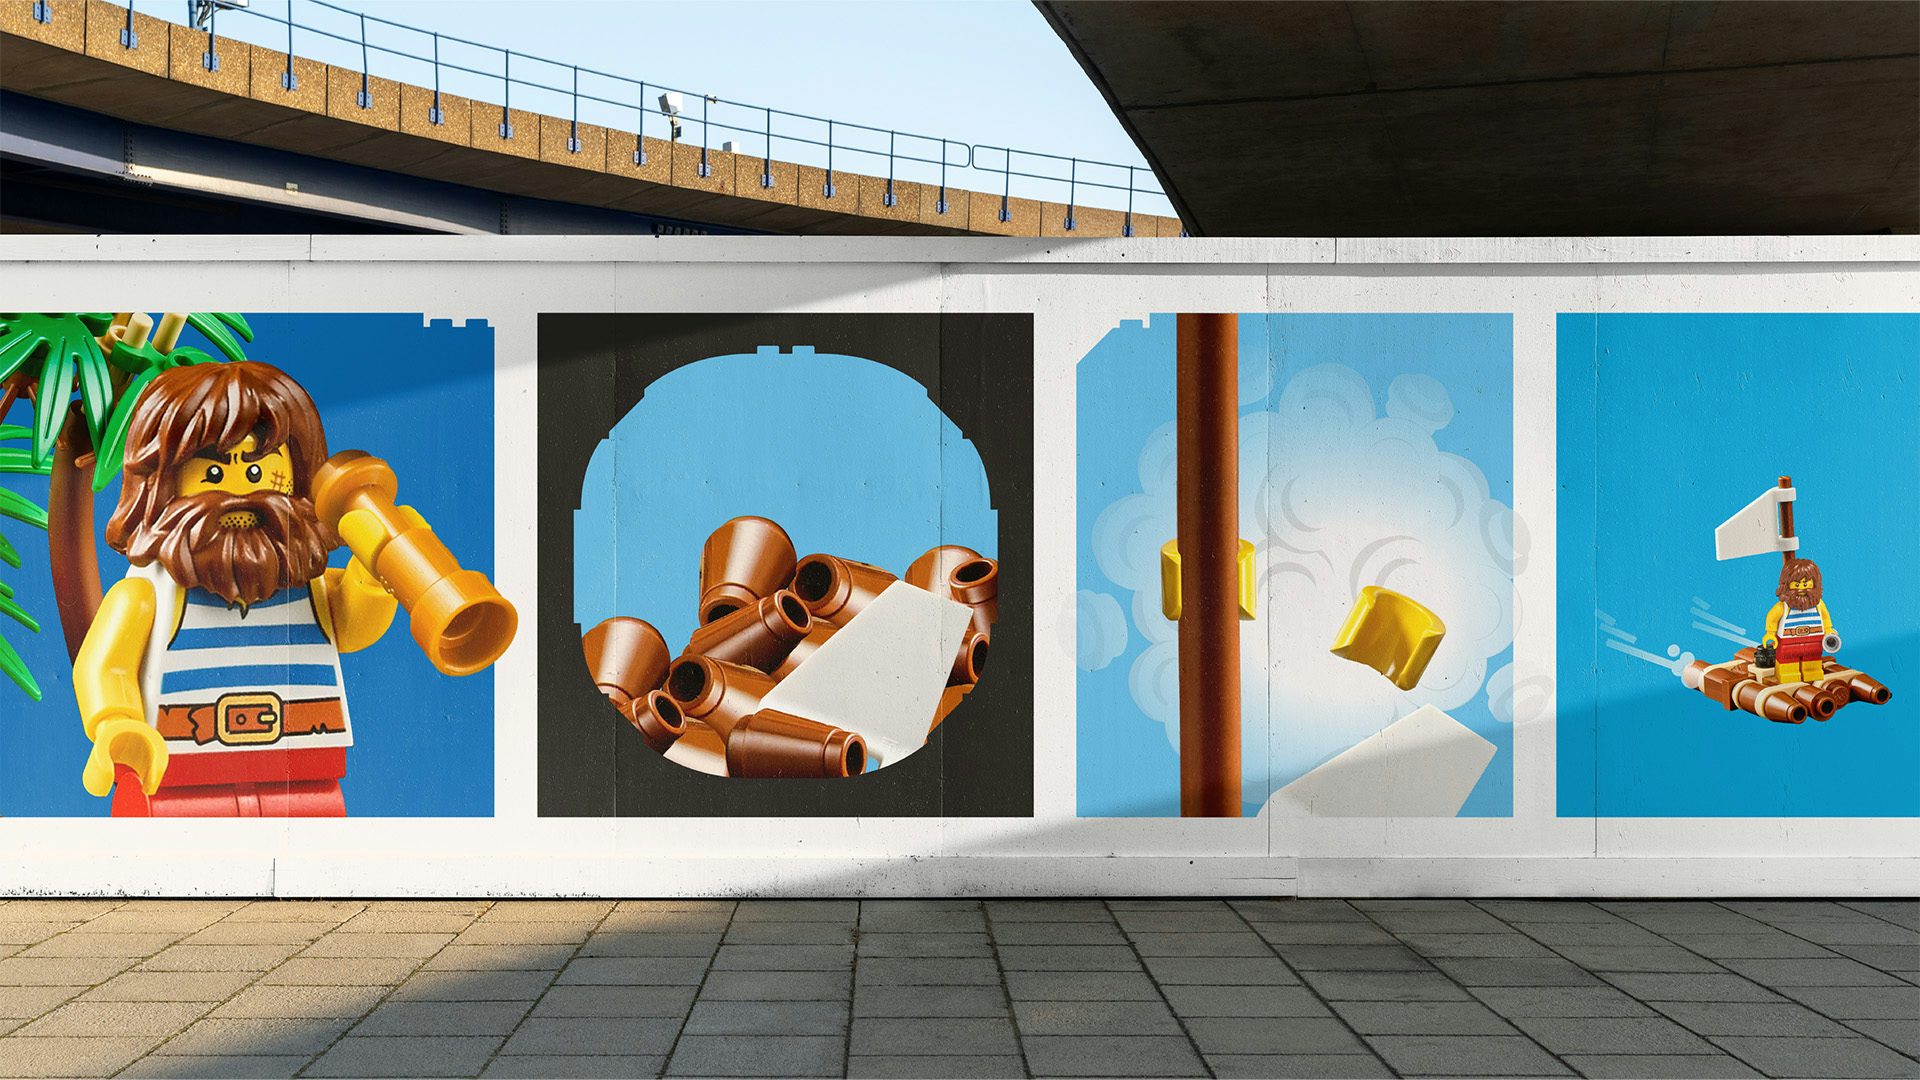 Image shows a row of four outdoor adverts showing Lego's new design system